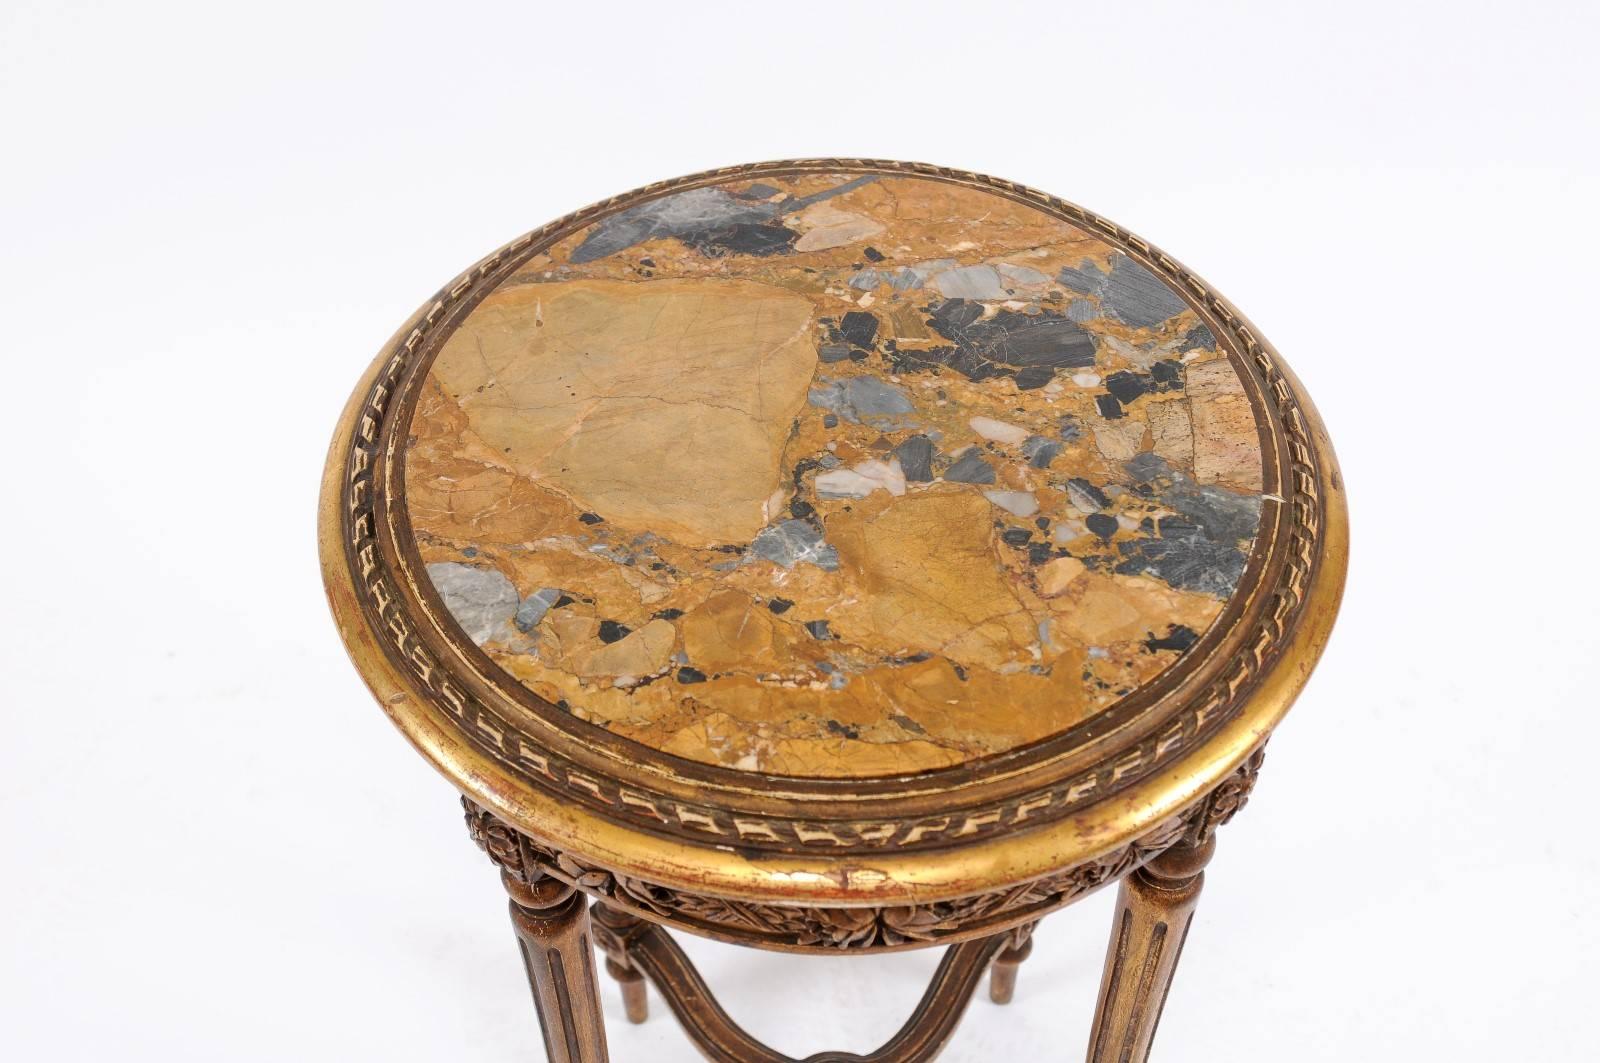 20th Century French 1930s Neoclassical Style Gilded Guéridon Table with Variegated Marble Top